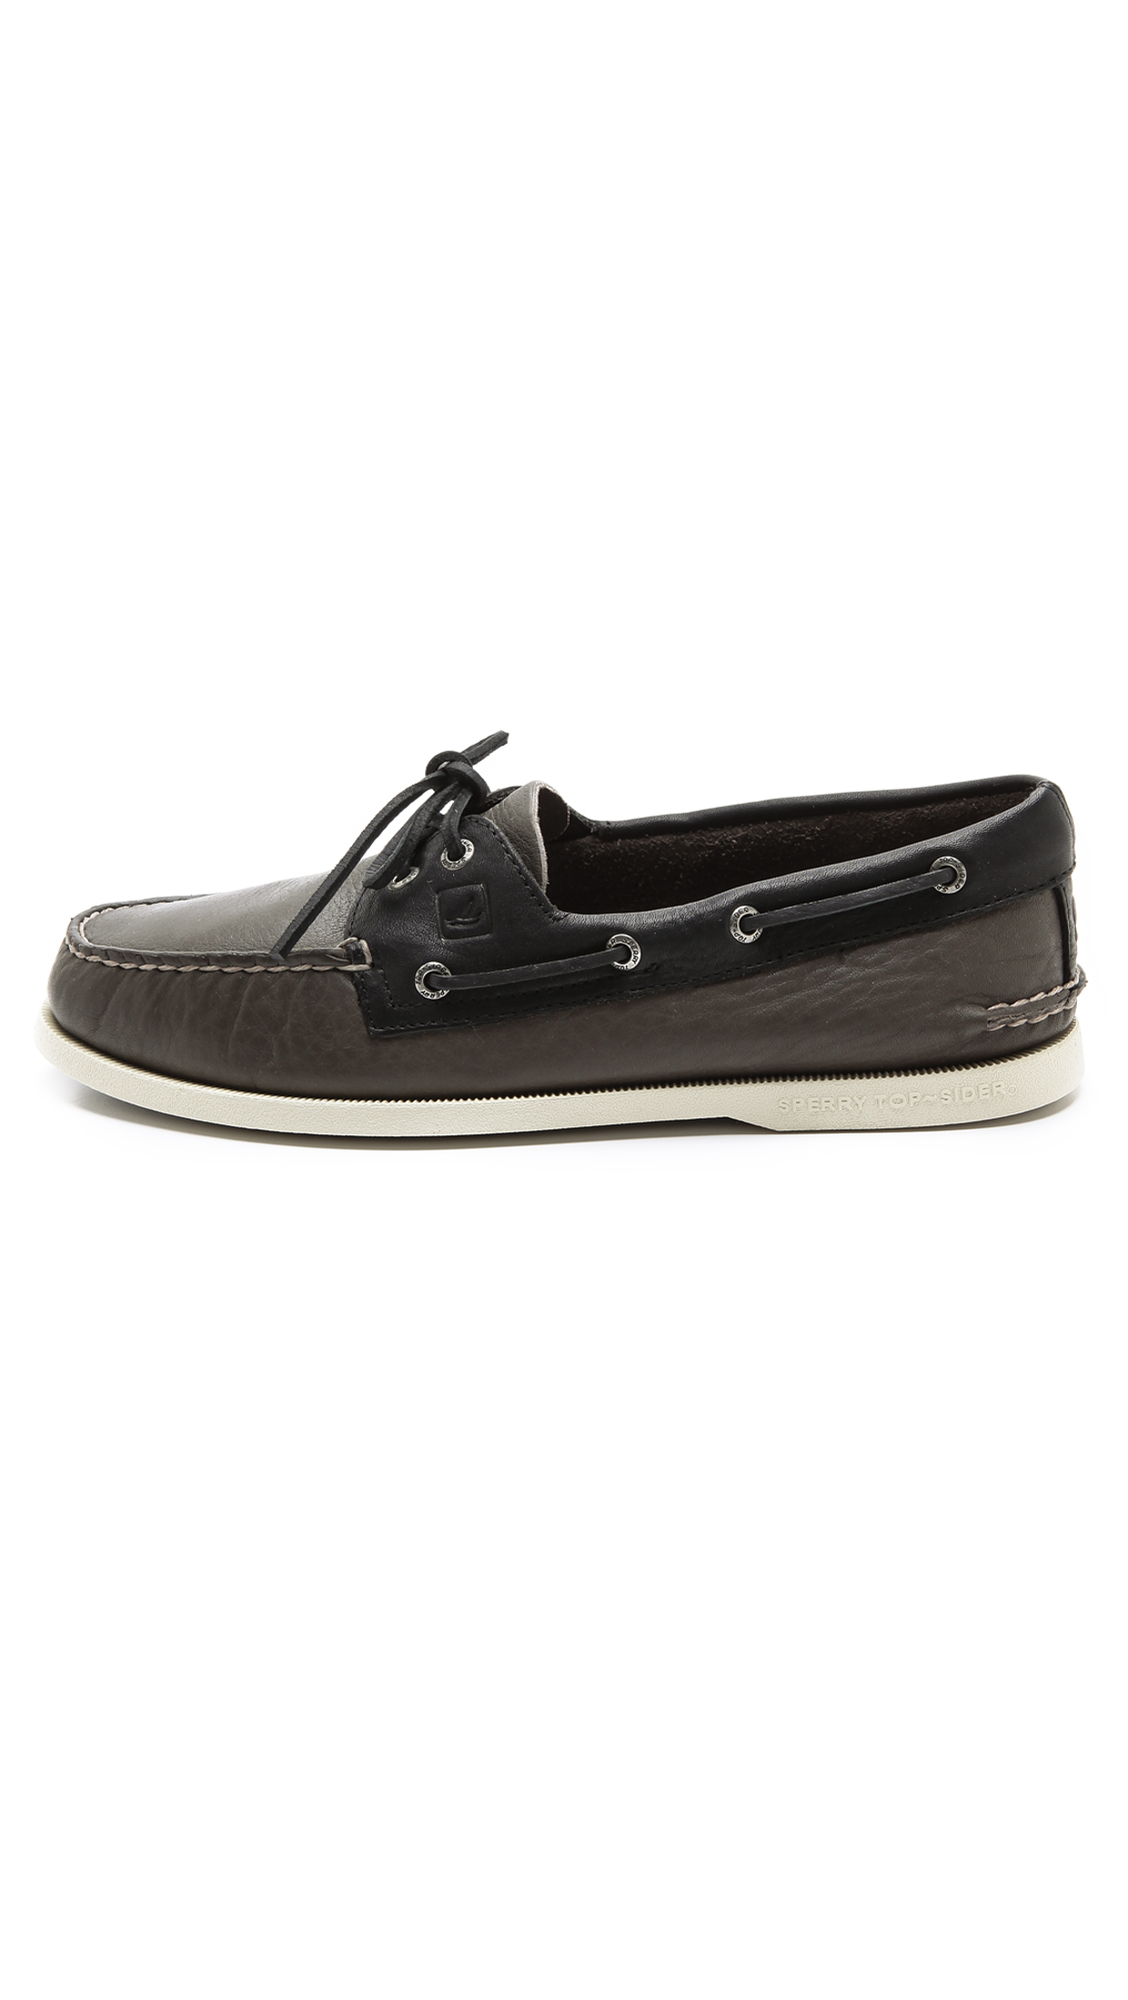 Sperry Top-Sider 2-Eye Two Tone Boat Shoes in Grey/Black (Gray) for Men ...